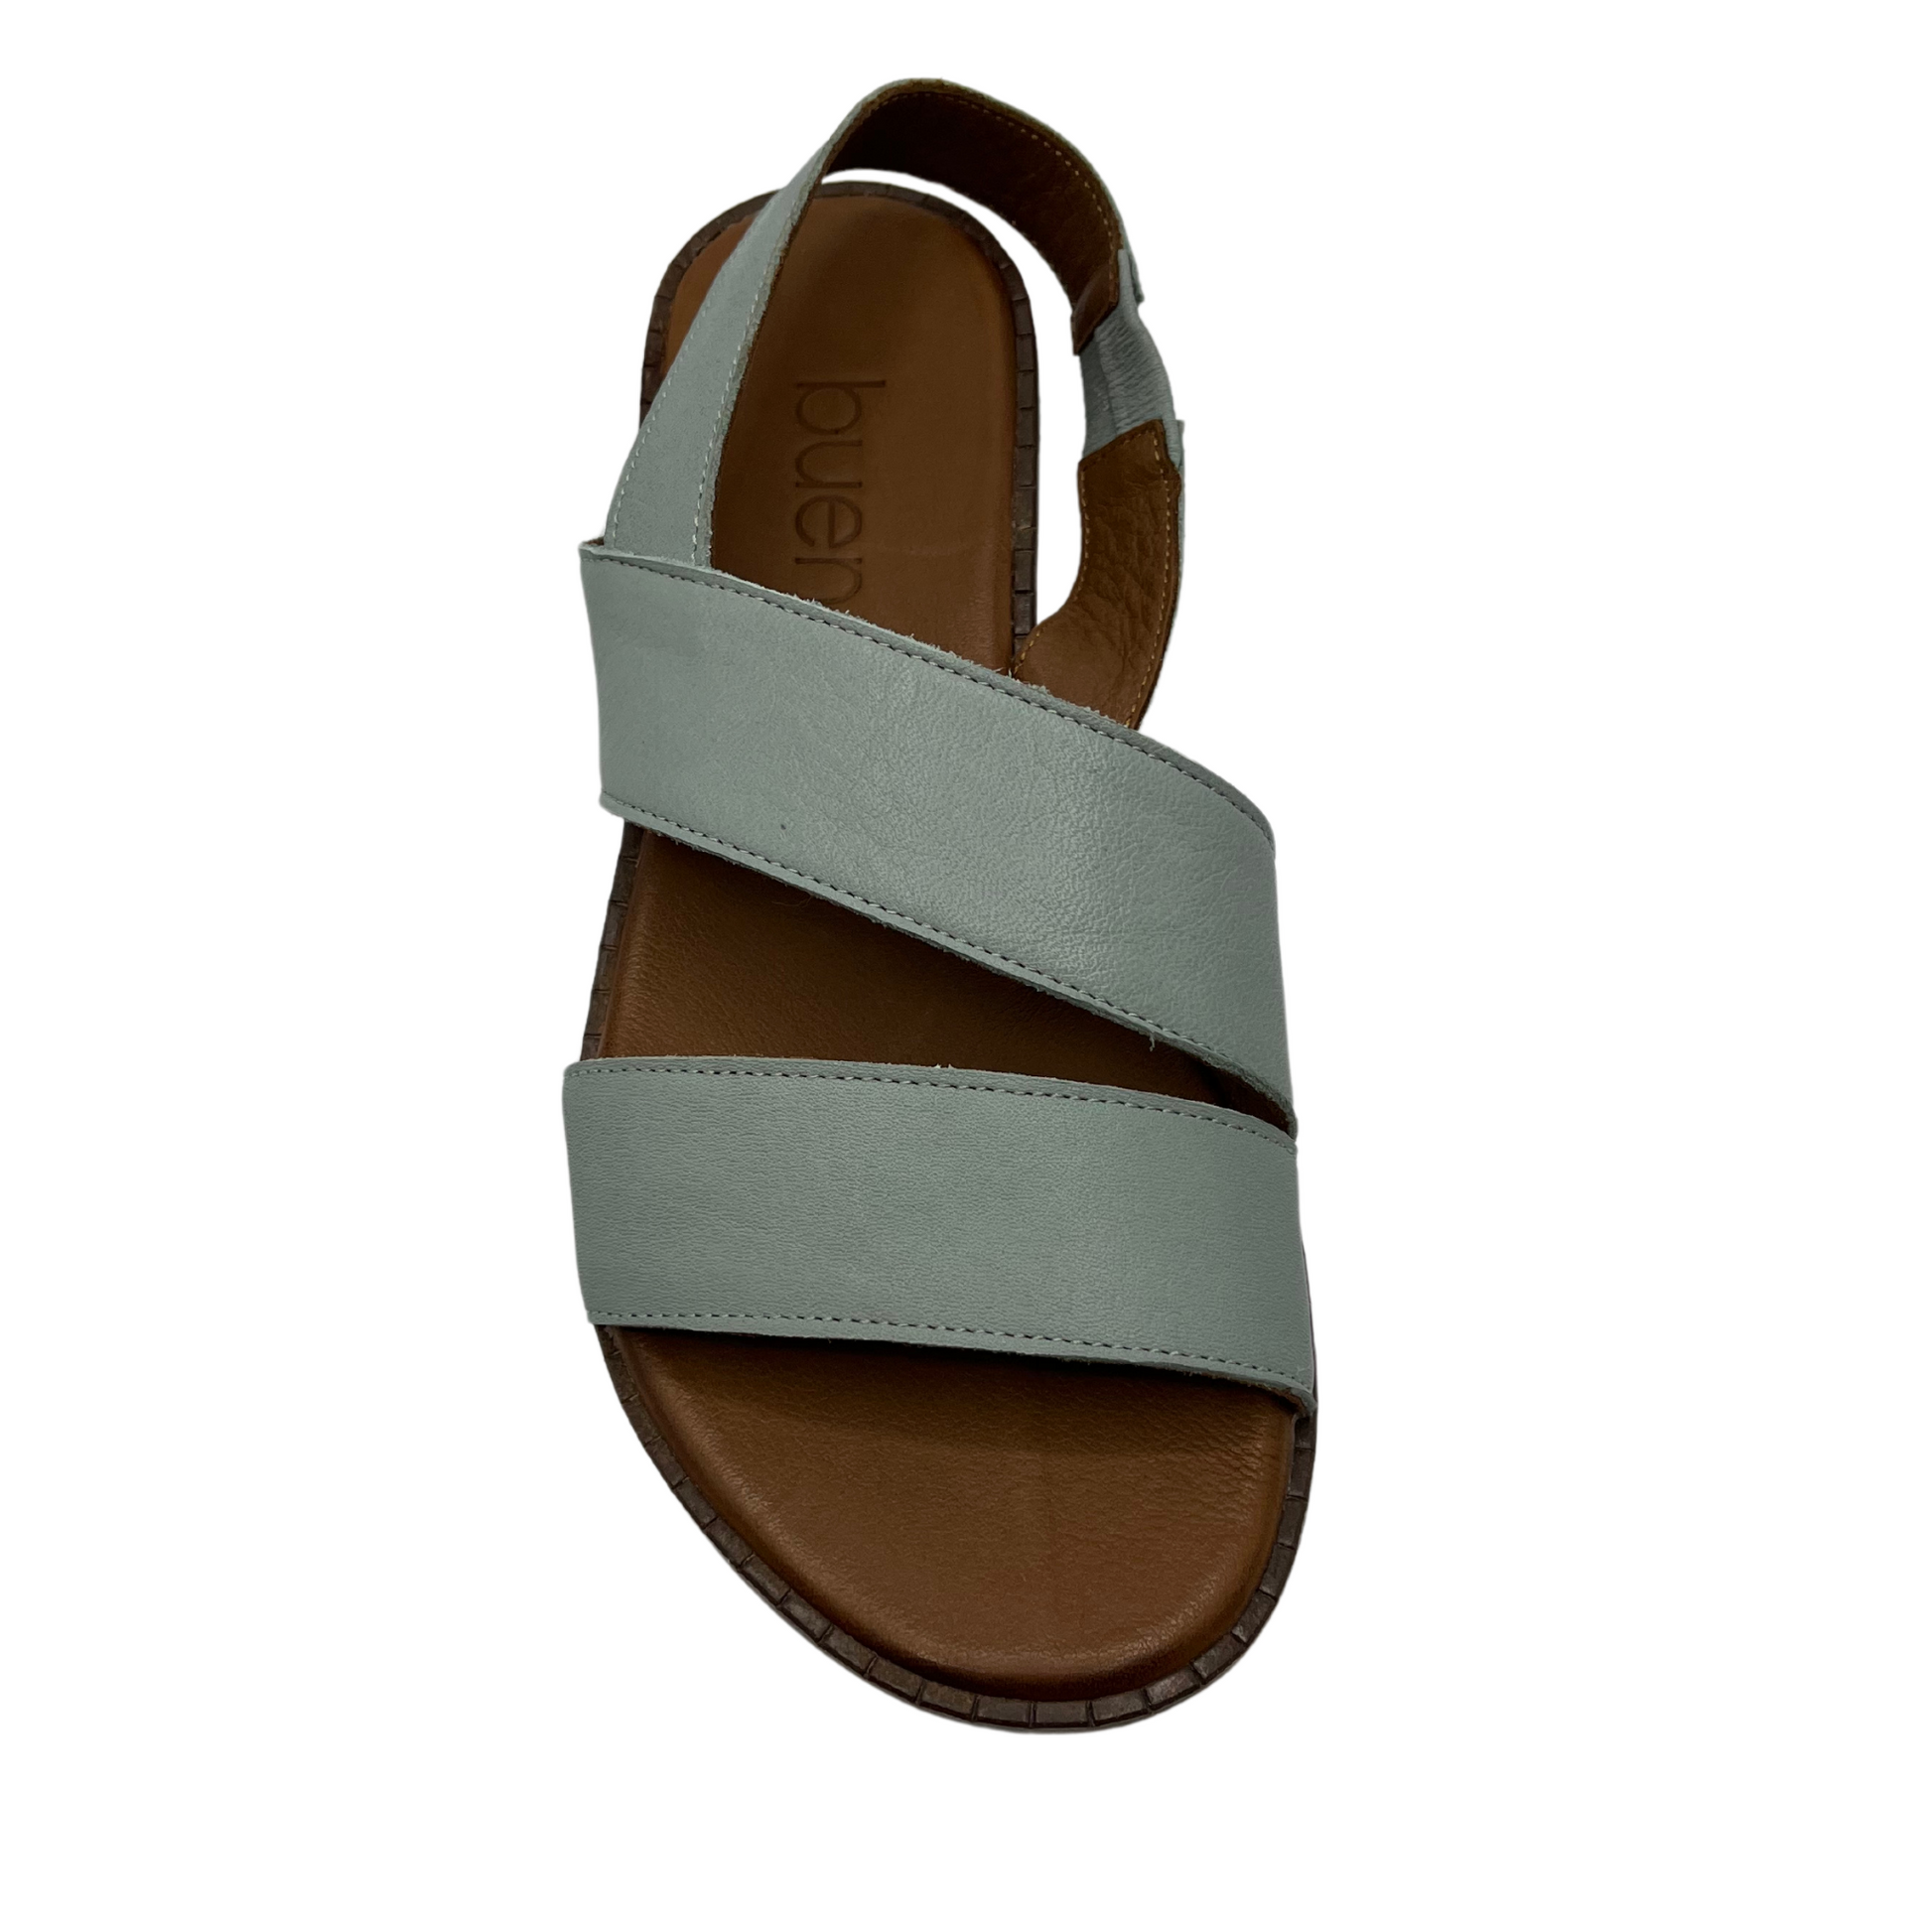 Top view of pale green leather sandal with slight wedge heel, rounded tow and slingback strap